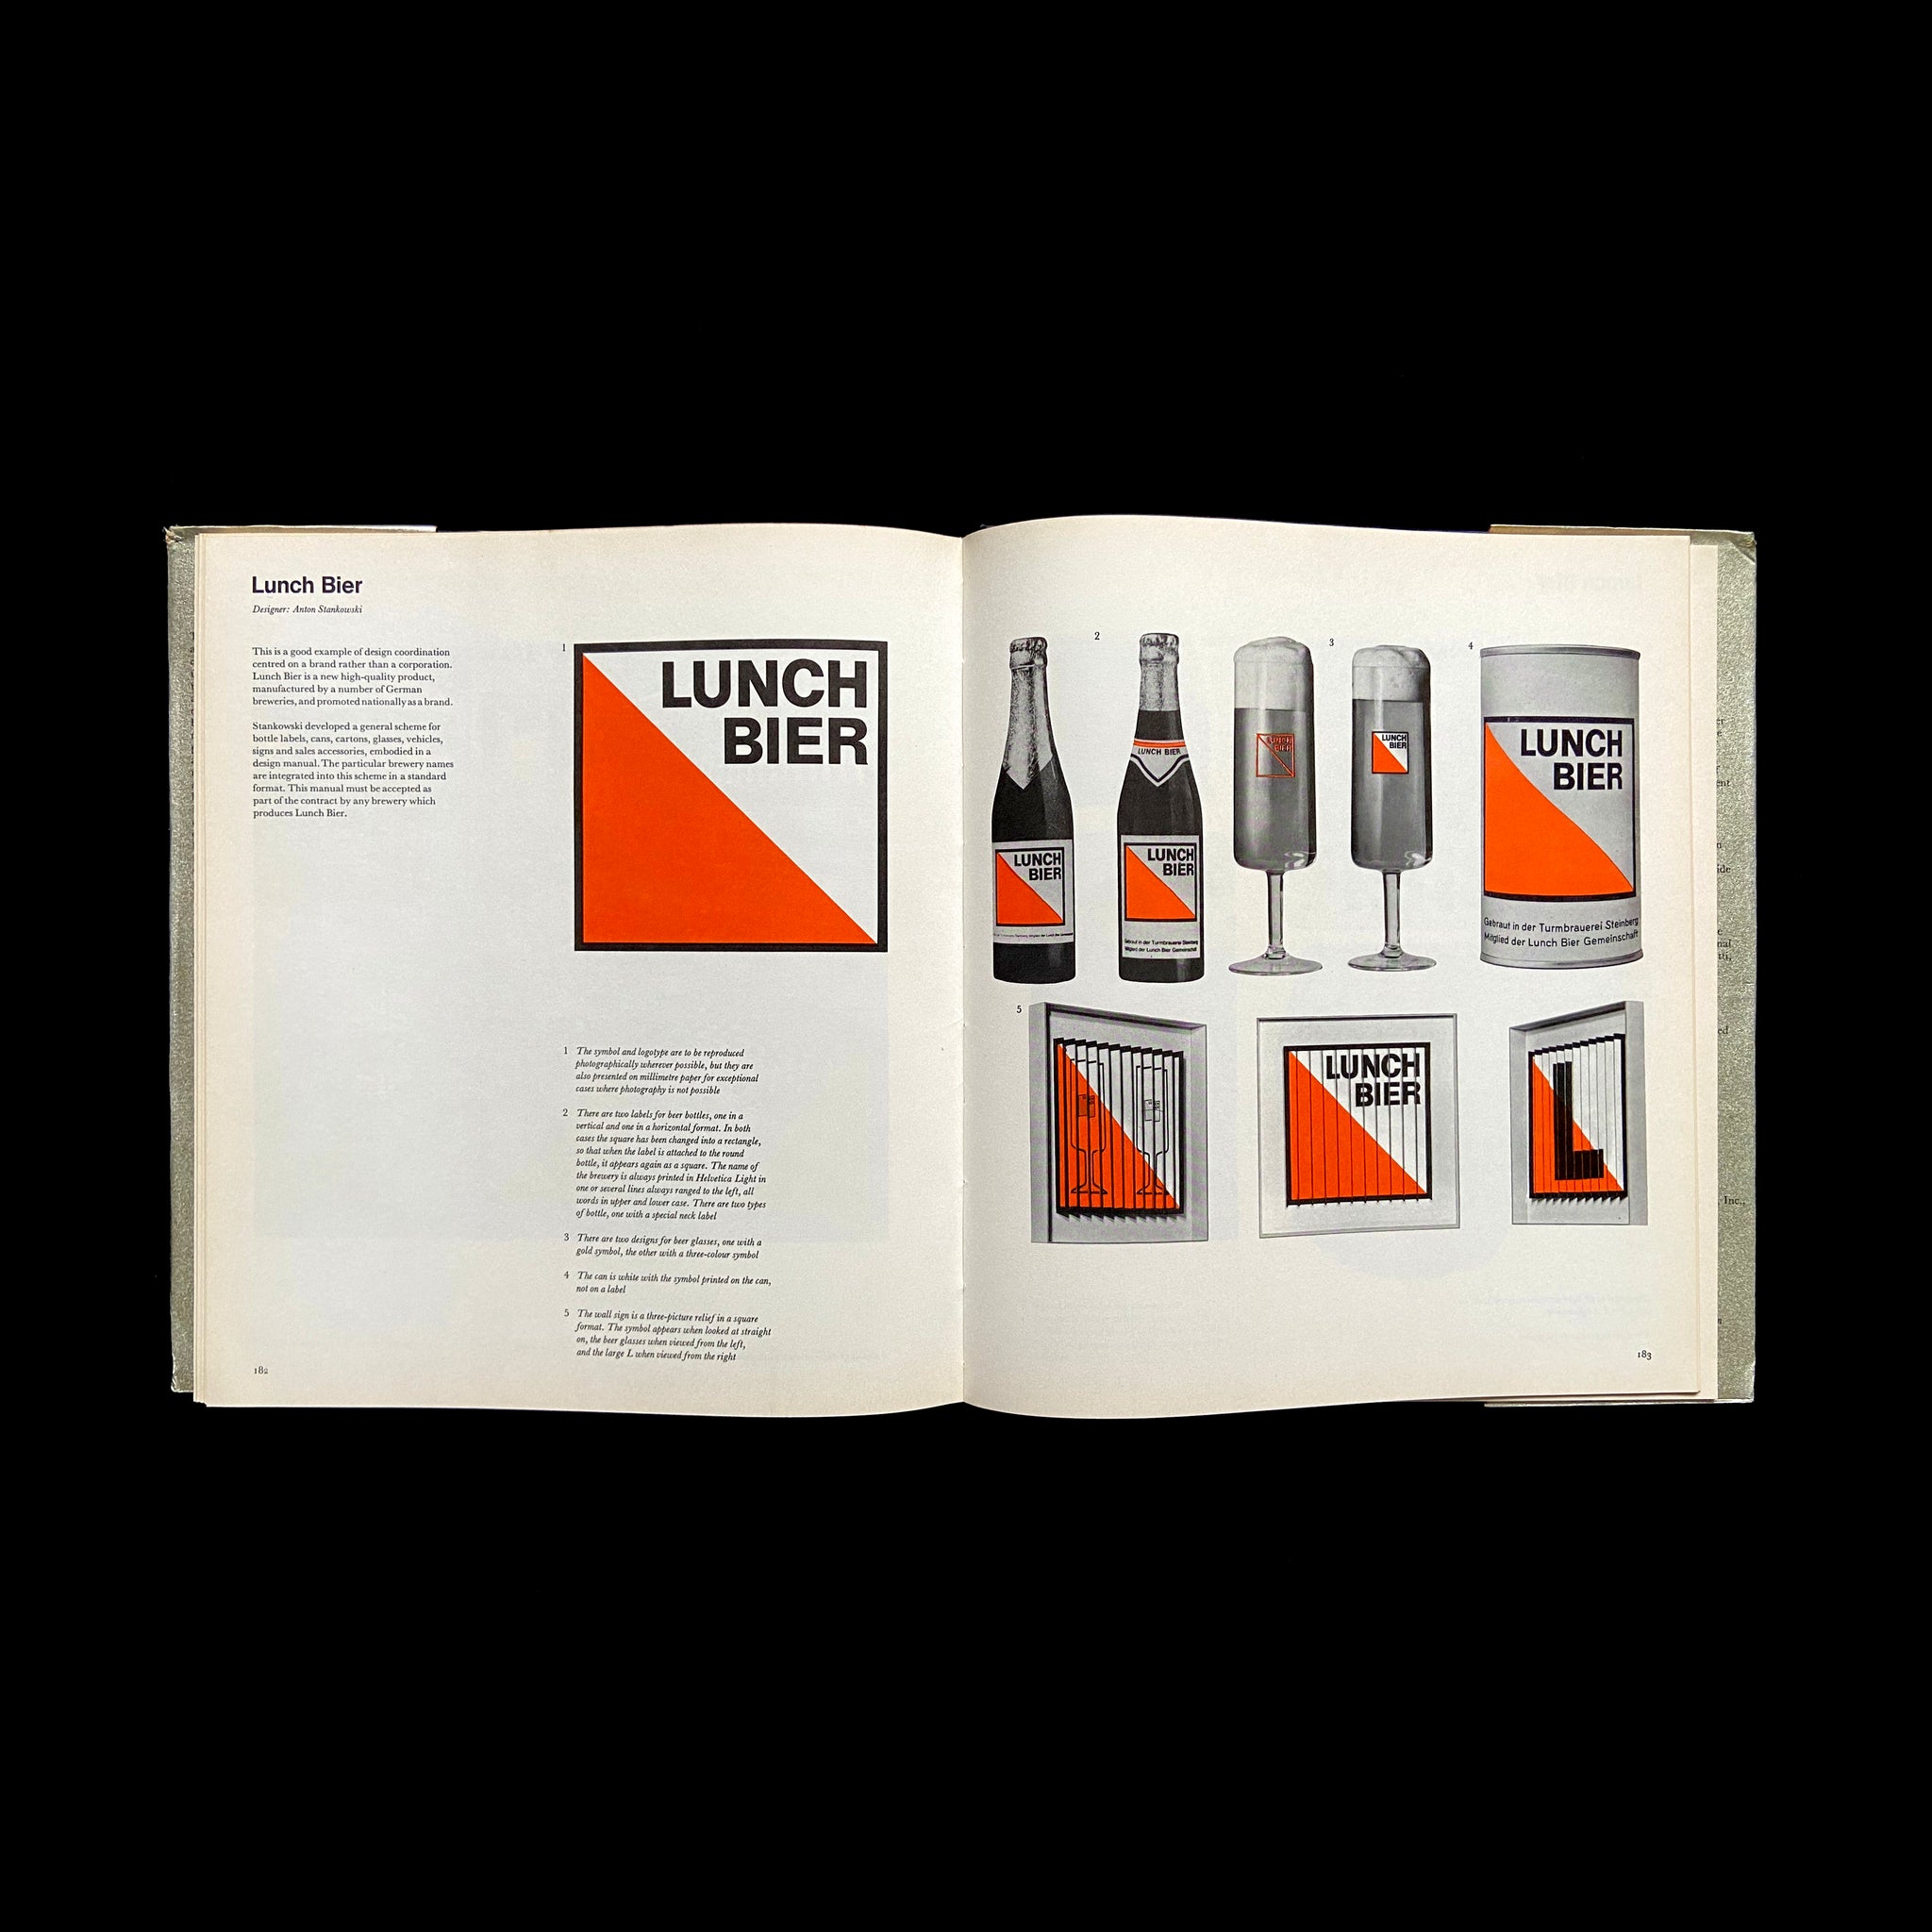 Design Coordination and Corporate Image, 1967